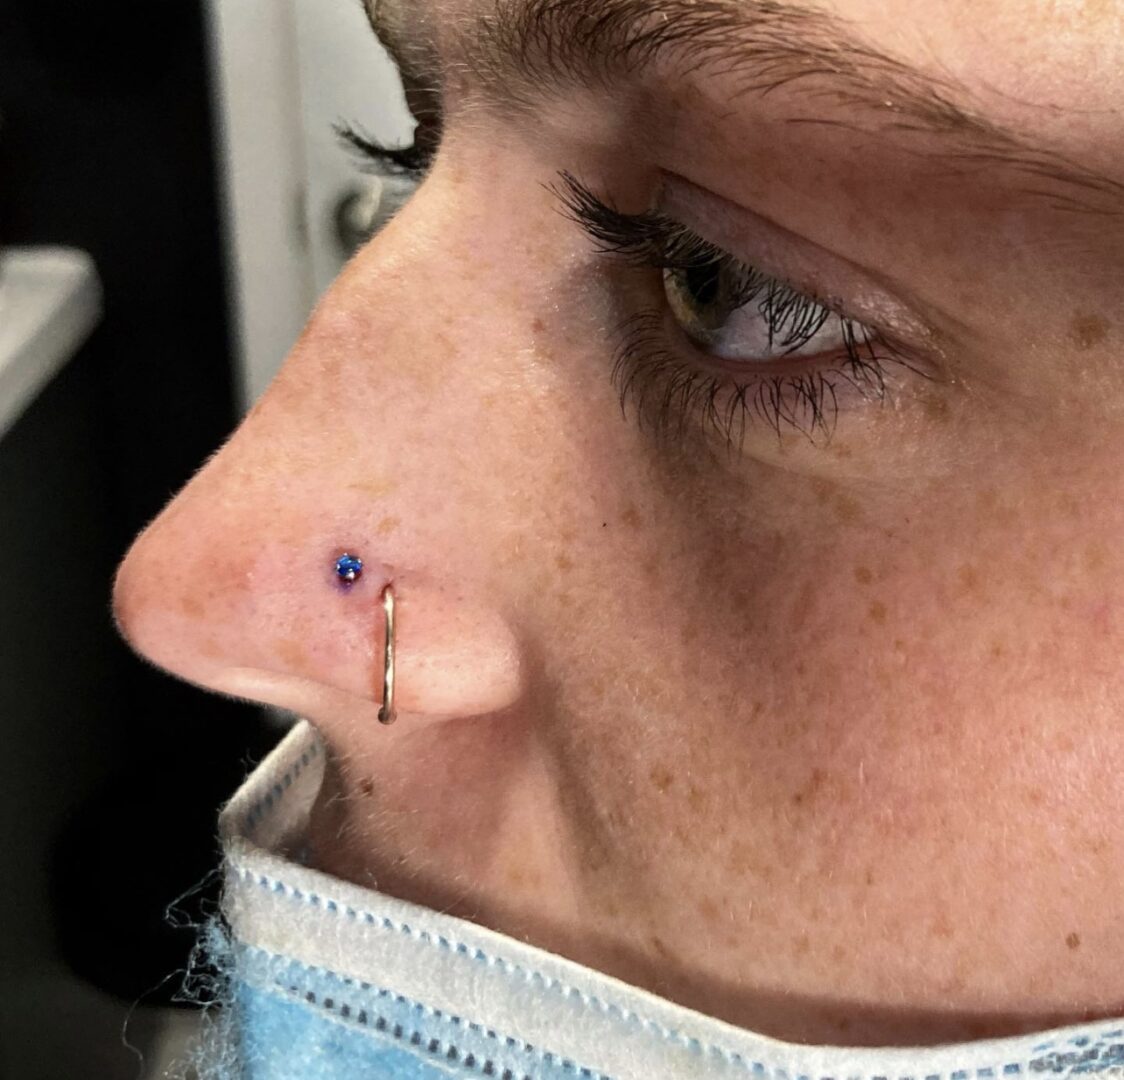 A woman with a nose piercing and blue ink.